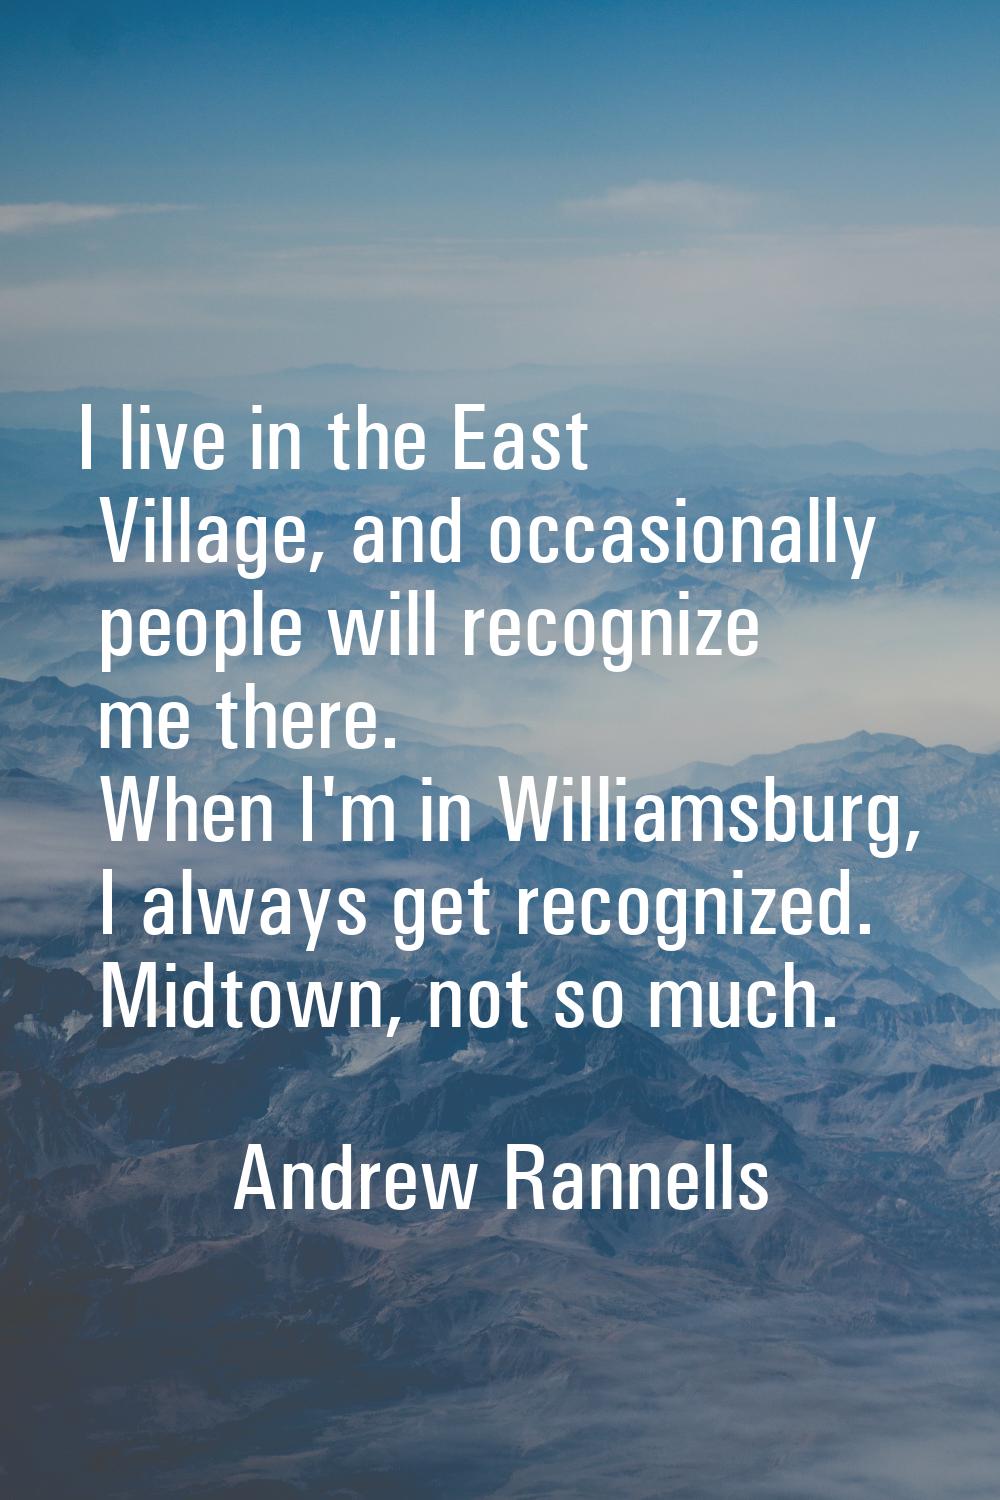 I live in the East Village, and occasionally people will recognize me there. When I'm in Williamsbu